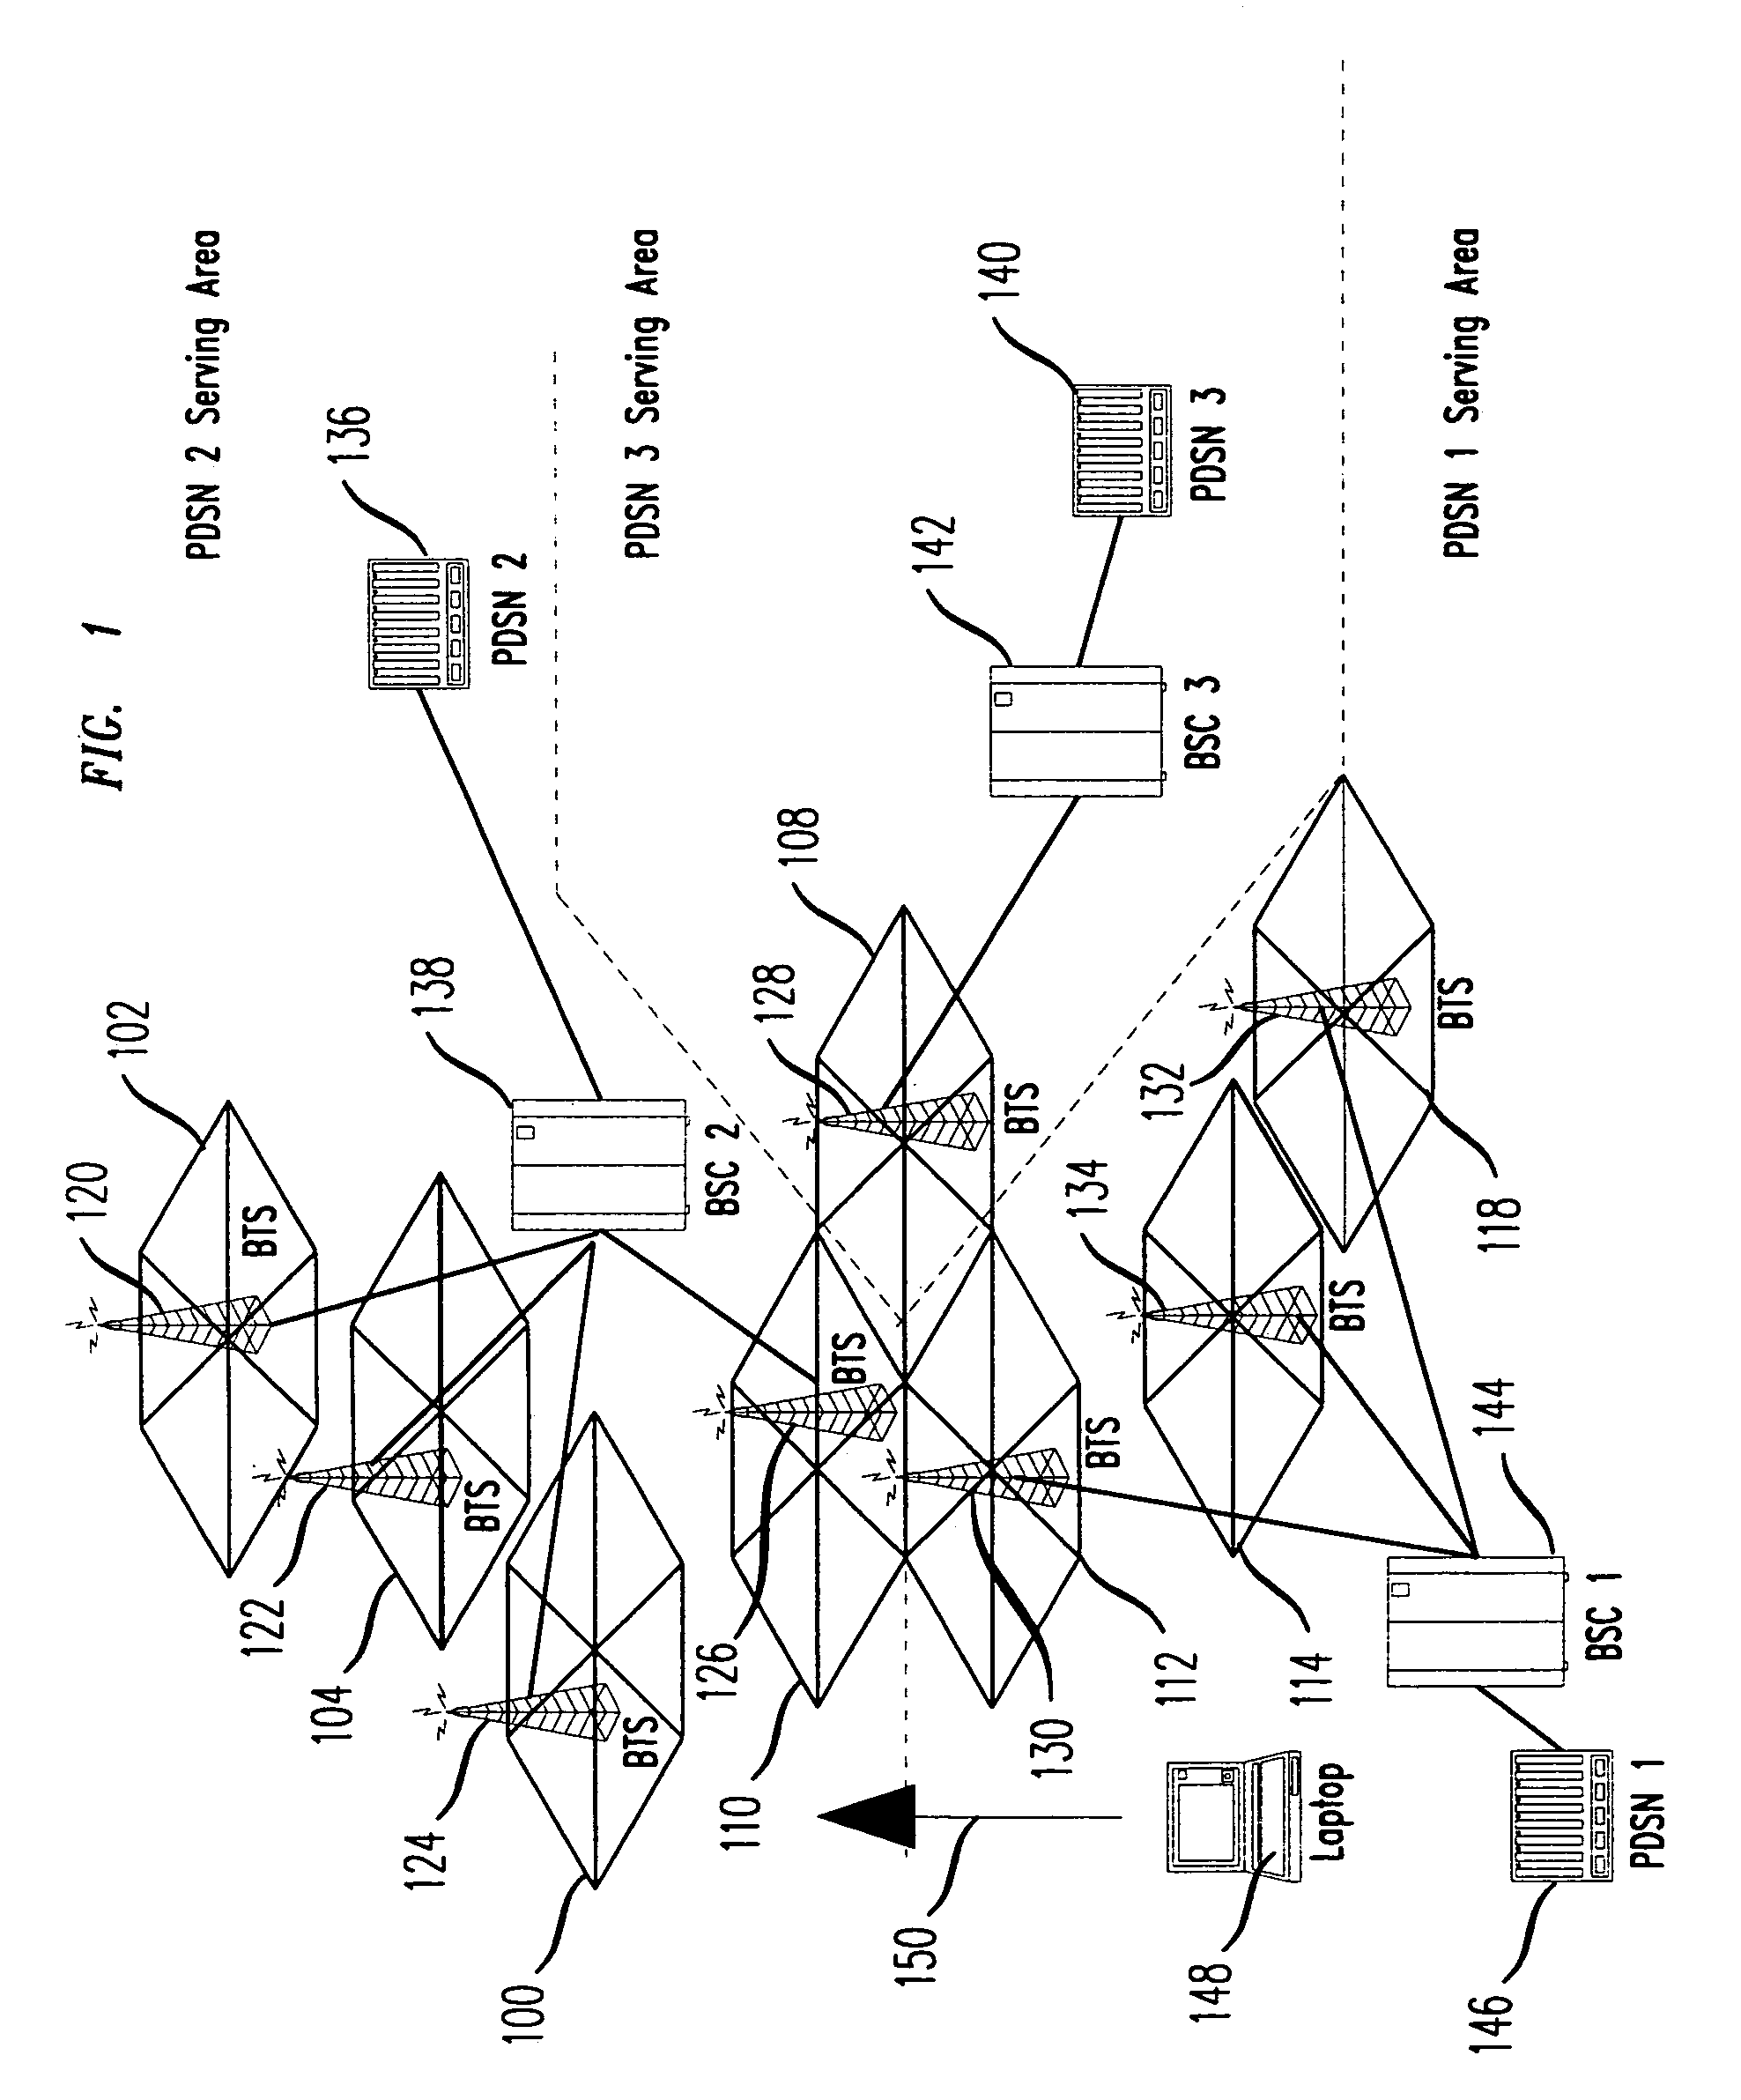 Method for providing multiple points of connectivity to subscribers of wireless communication networks